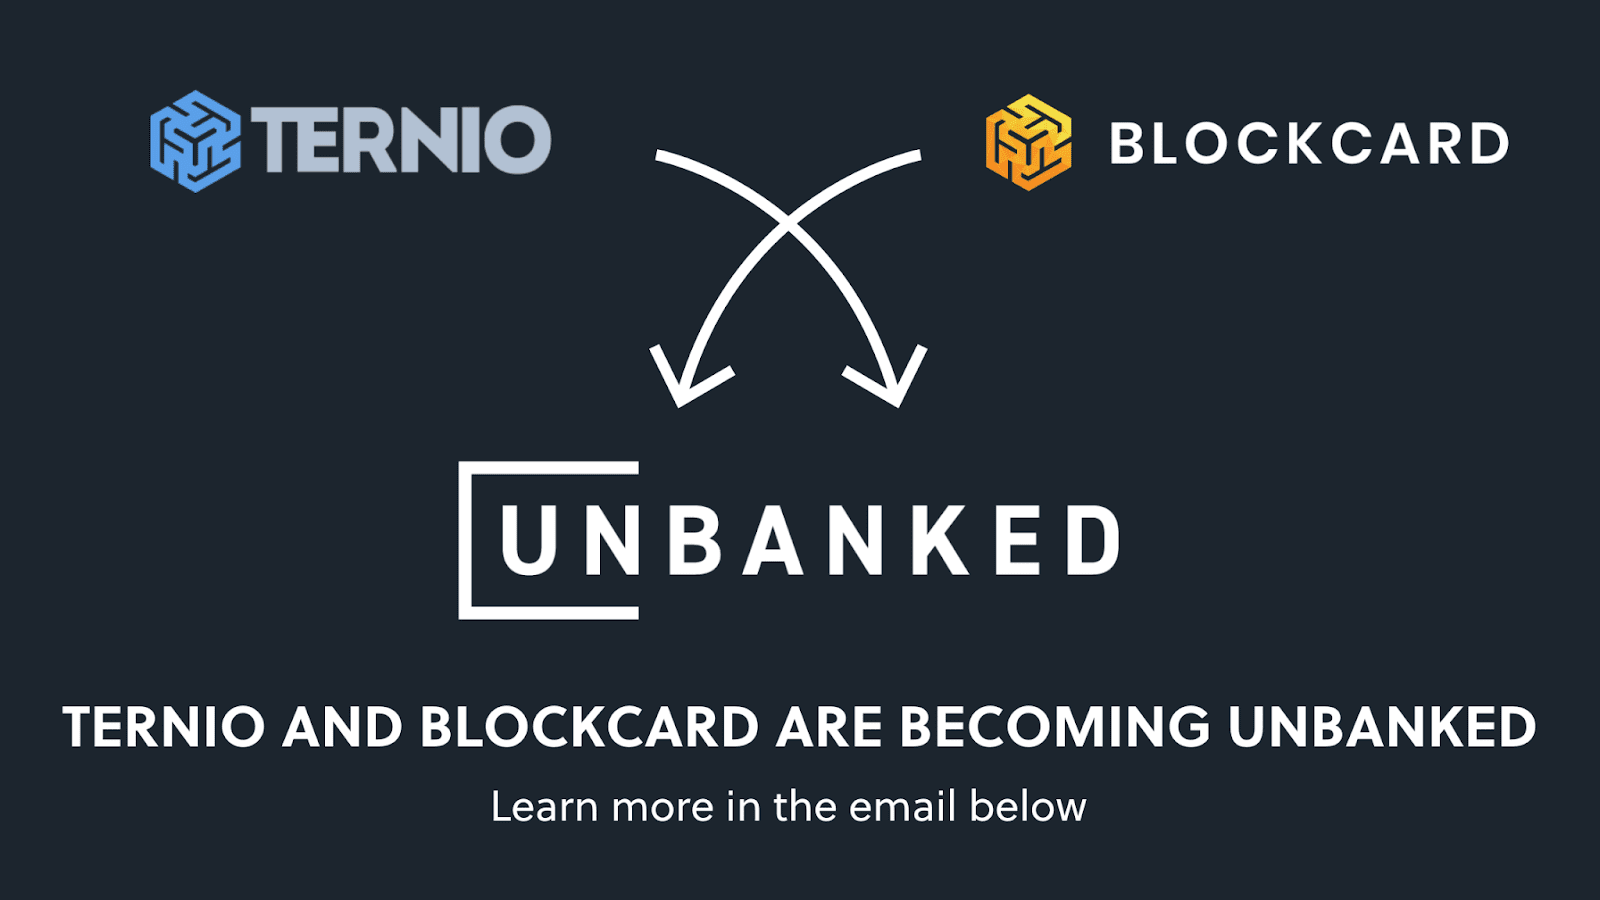 Ternio’s BlockCard Collaborates With Paxful